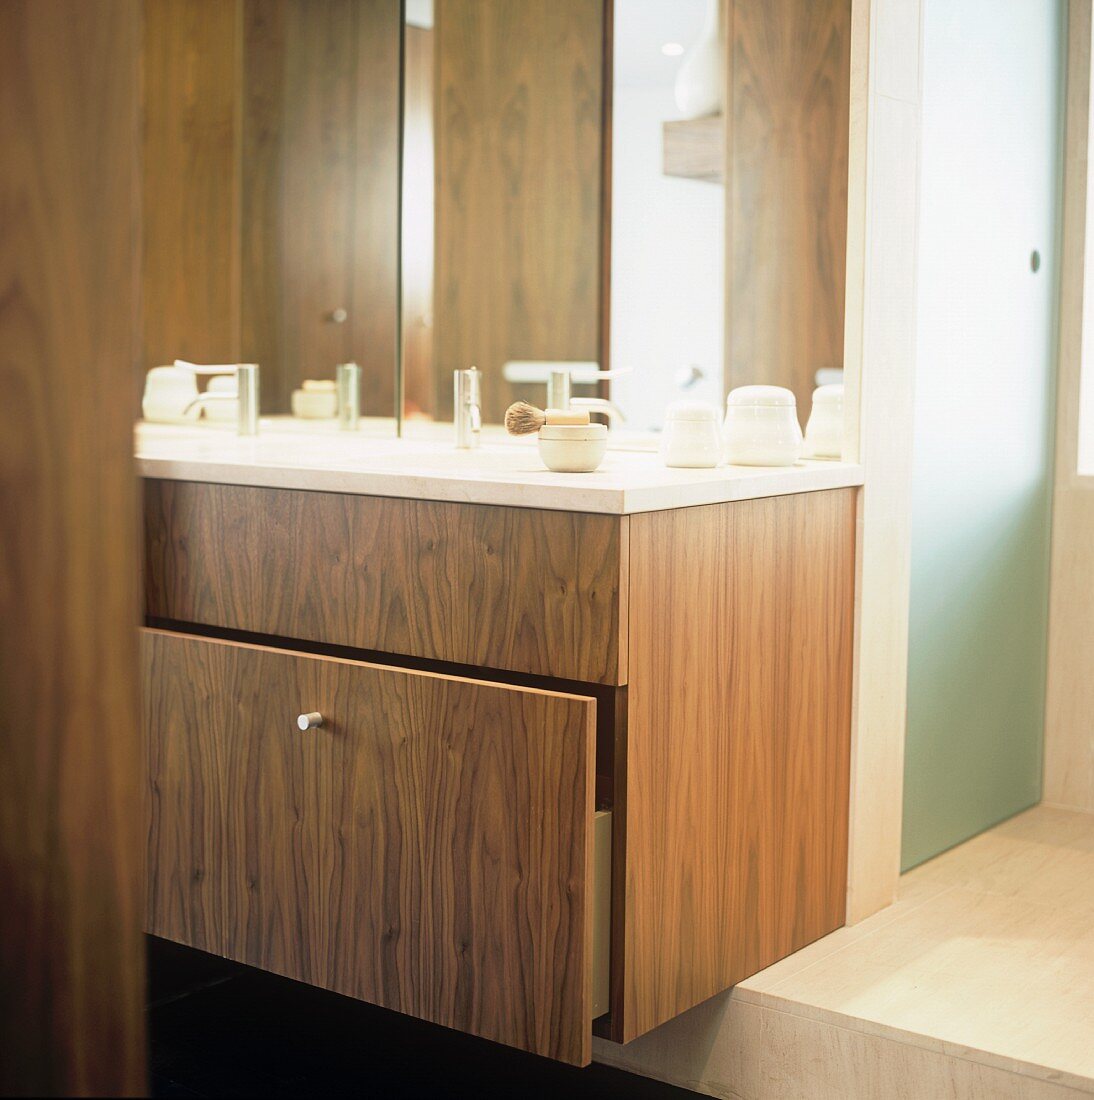 A modern wash stand with a built-in wooden drawer